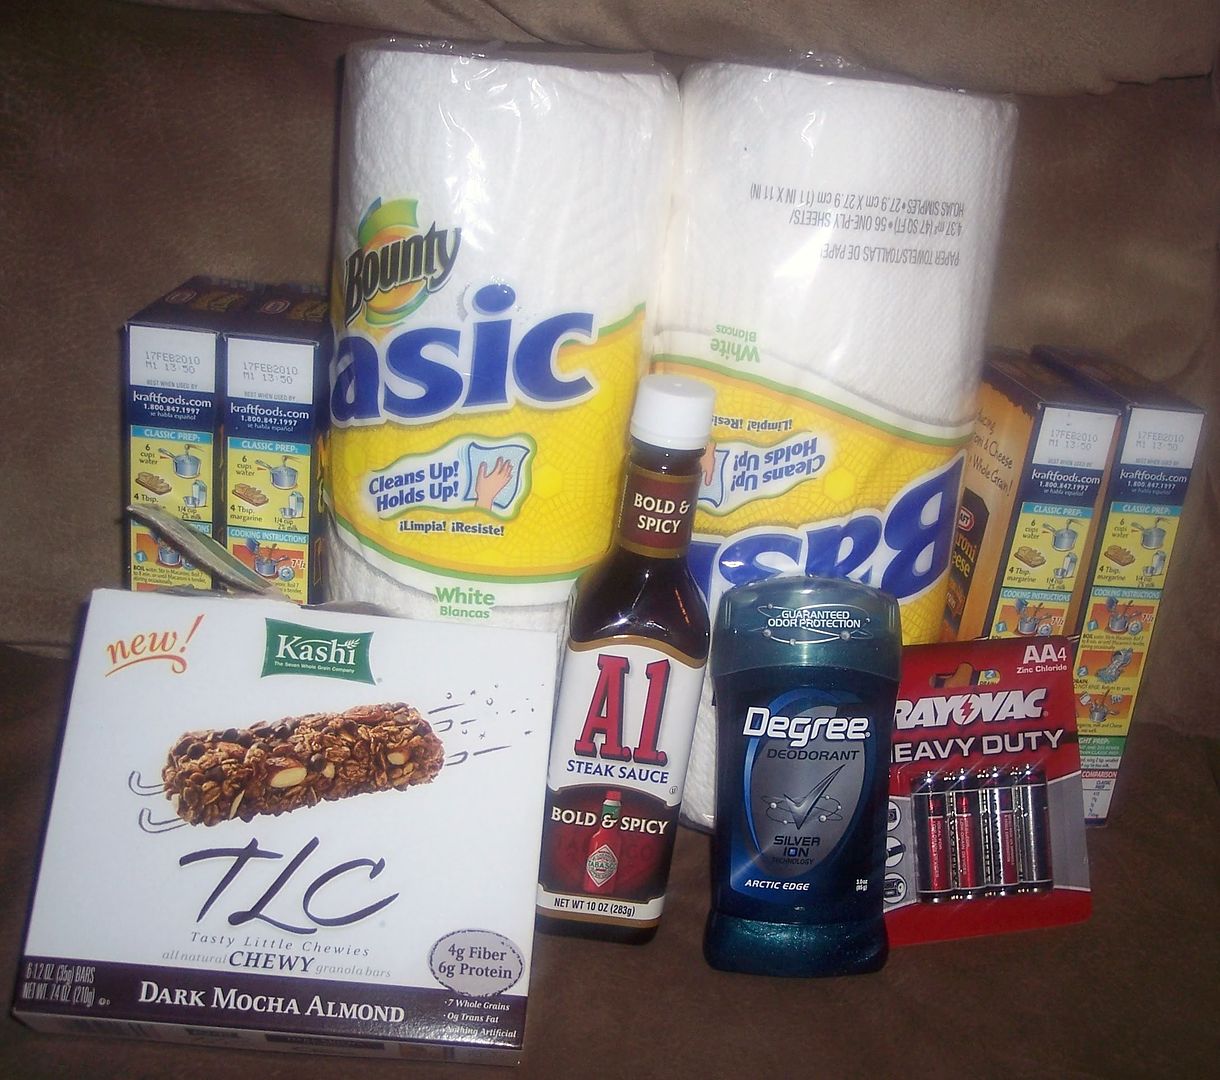 $13.03 worth of products for free